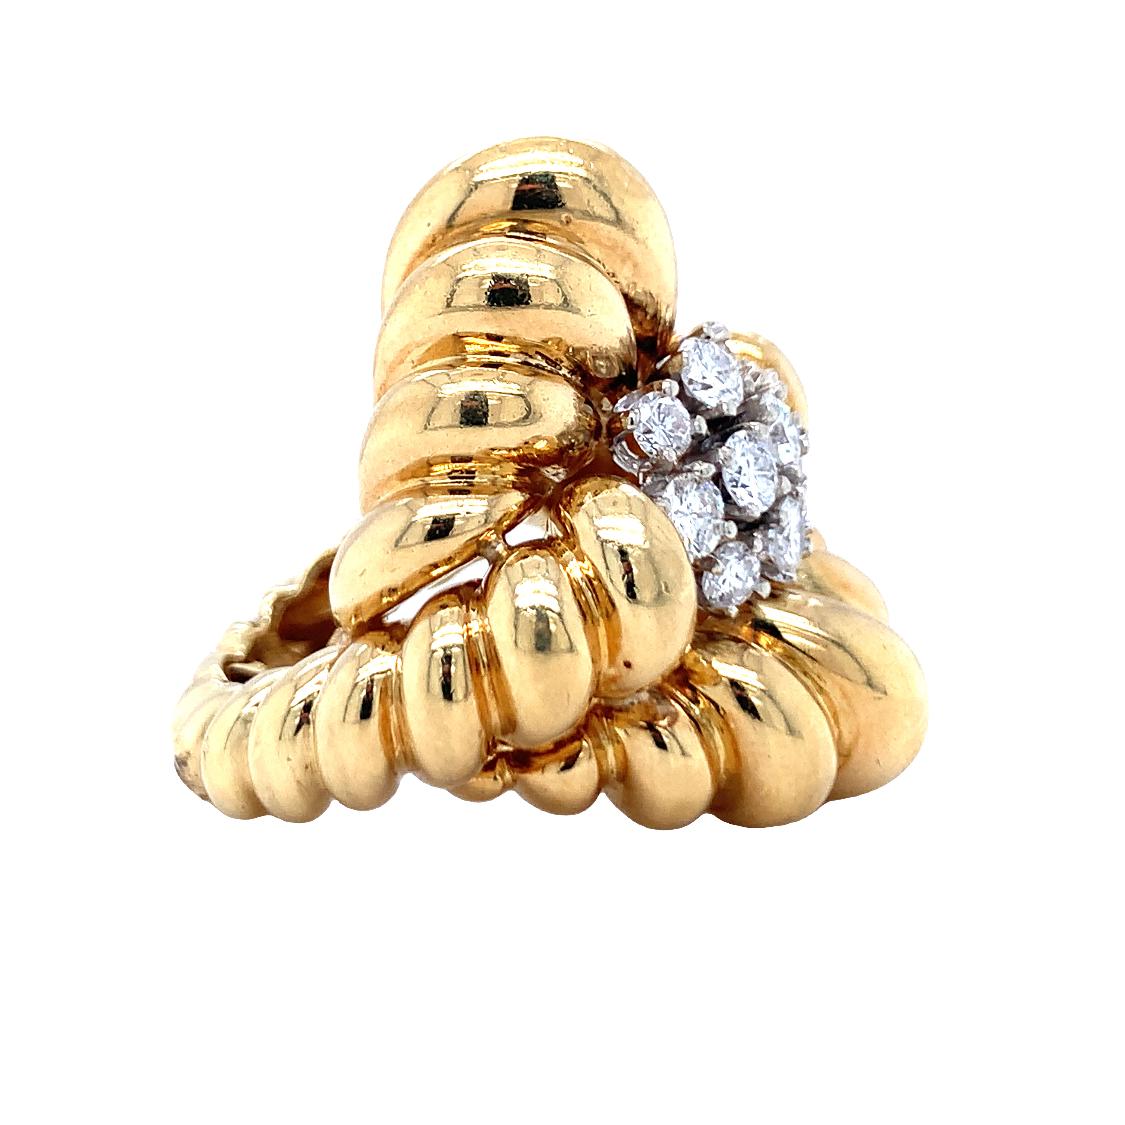 One diamond 18K yellow gold fluted ring with ribbed gold design and high polish finish featuring ten round brilliant cut diamonds weighing 1.50 ct. with G color and VS-2 clarity. Circa 1960s.

Chunky, gleaming, powerful.

Metal: 18K yellow